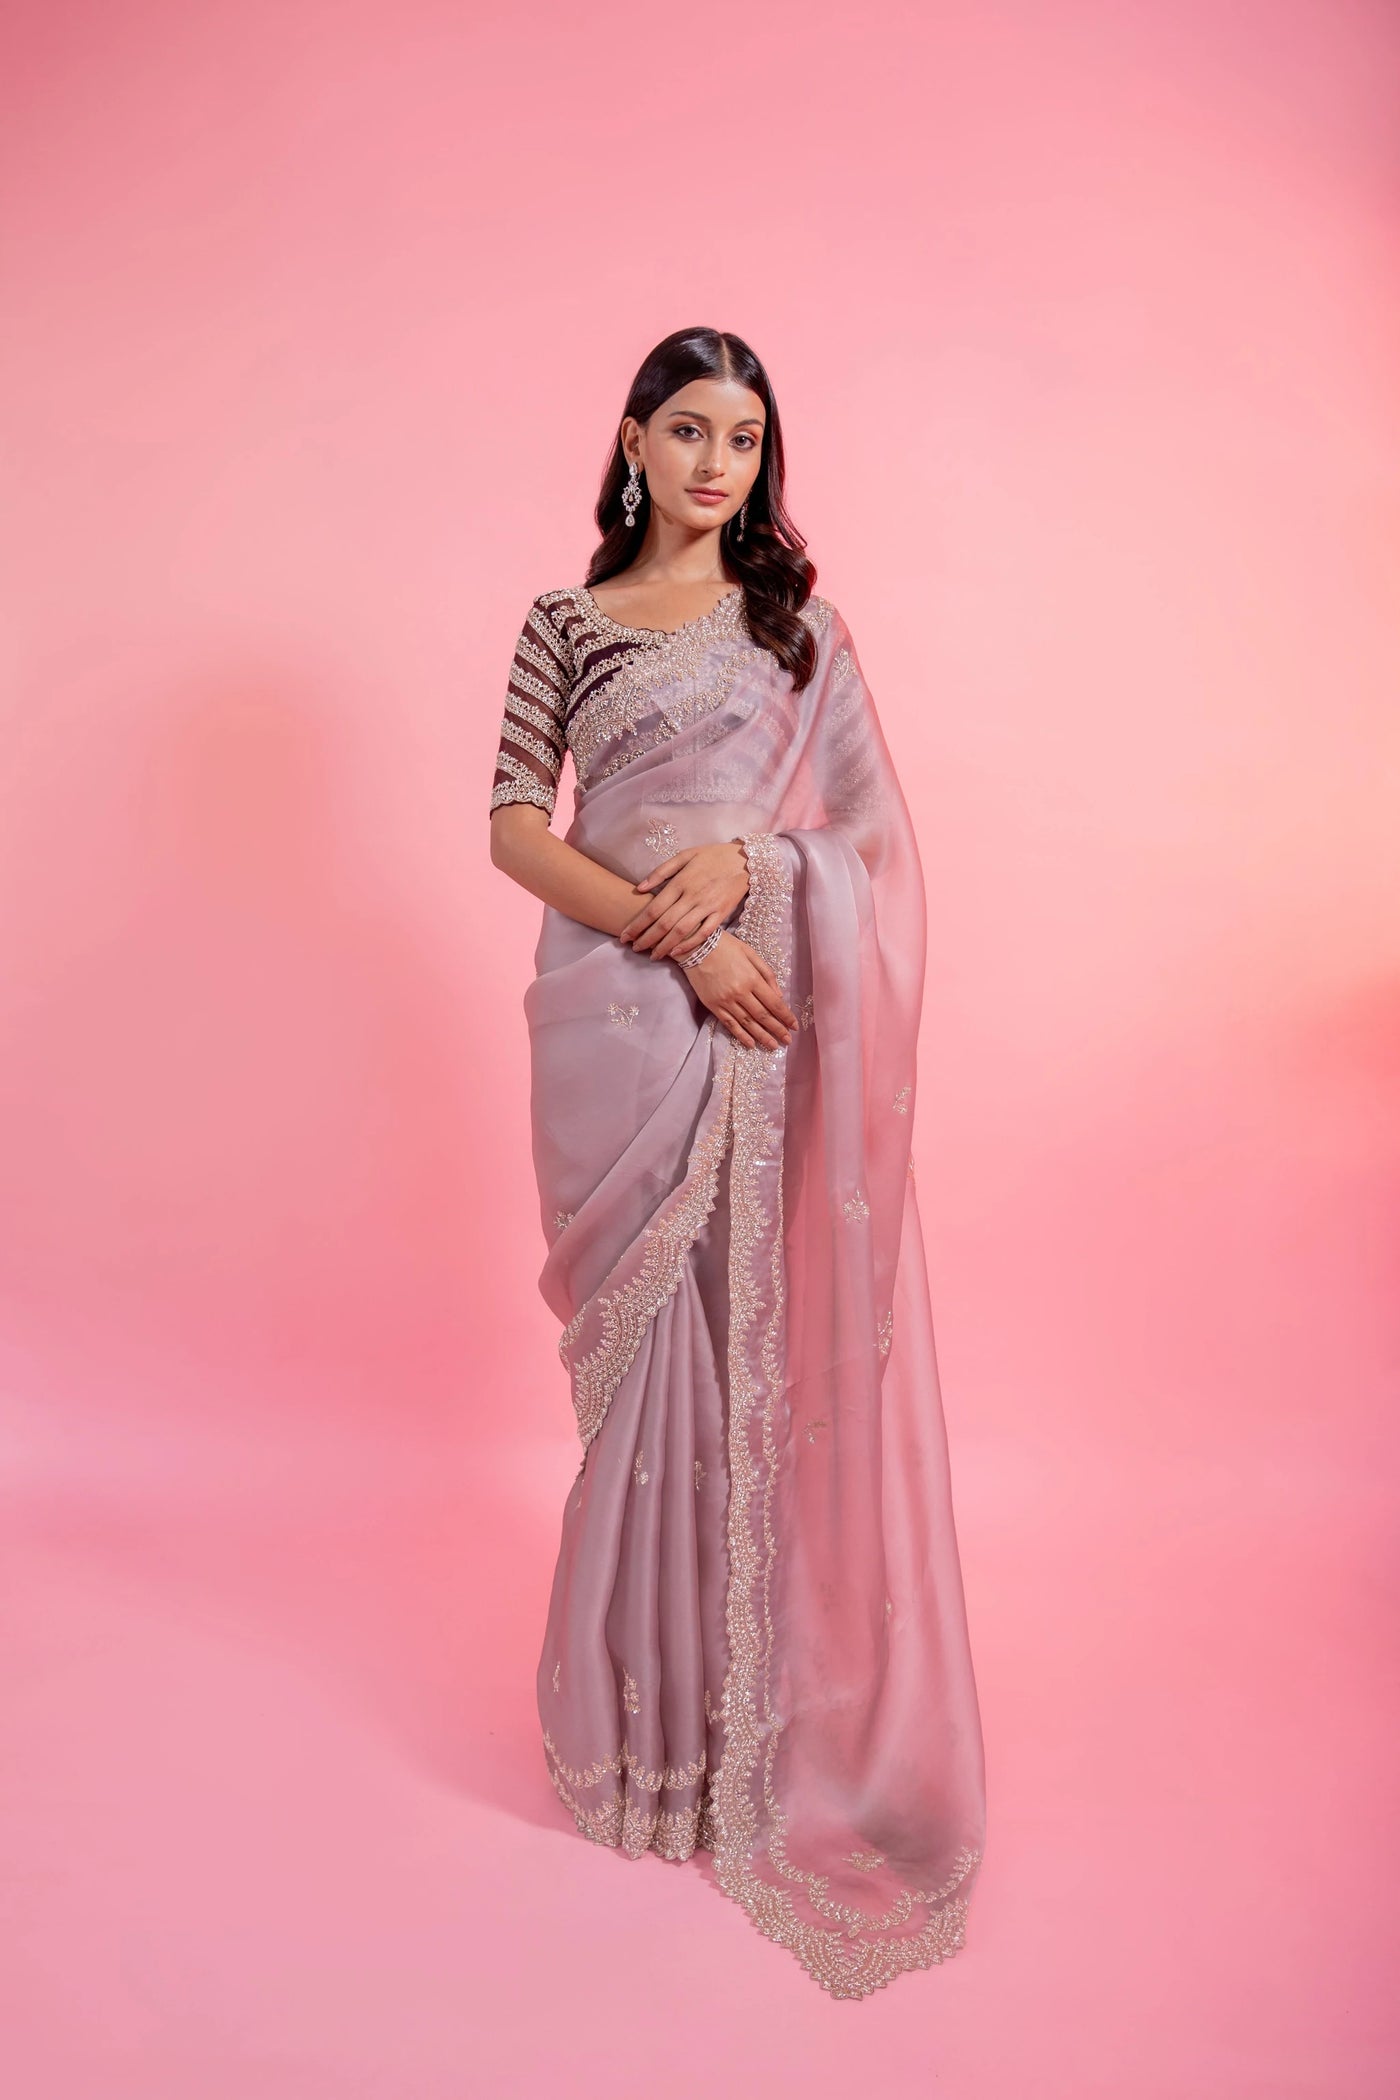 Jane Saree Indian Clothing in Denver, CO, Aurora, CO, Boulder, CO, Fort Collins, CO, Colorado Springs, CO, Parker, CO, Highlands Ranch, CO, Cherry Creek, CO, Centennial, CO, and Longmont, CO. NATIONWIDE SHIPPING USA- India Fashion X